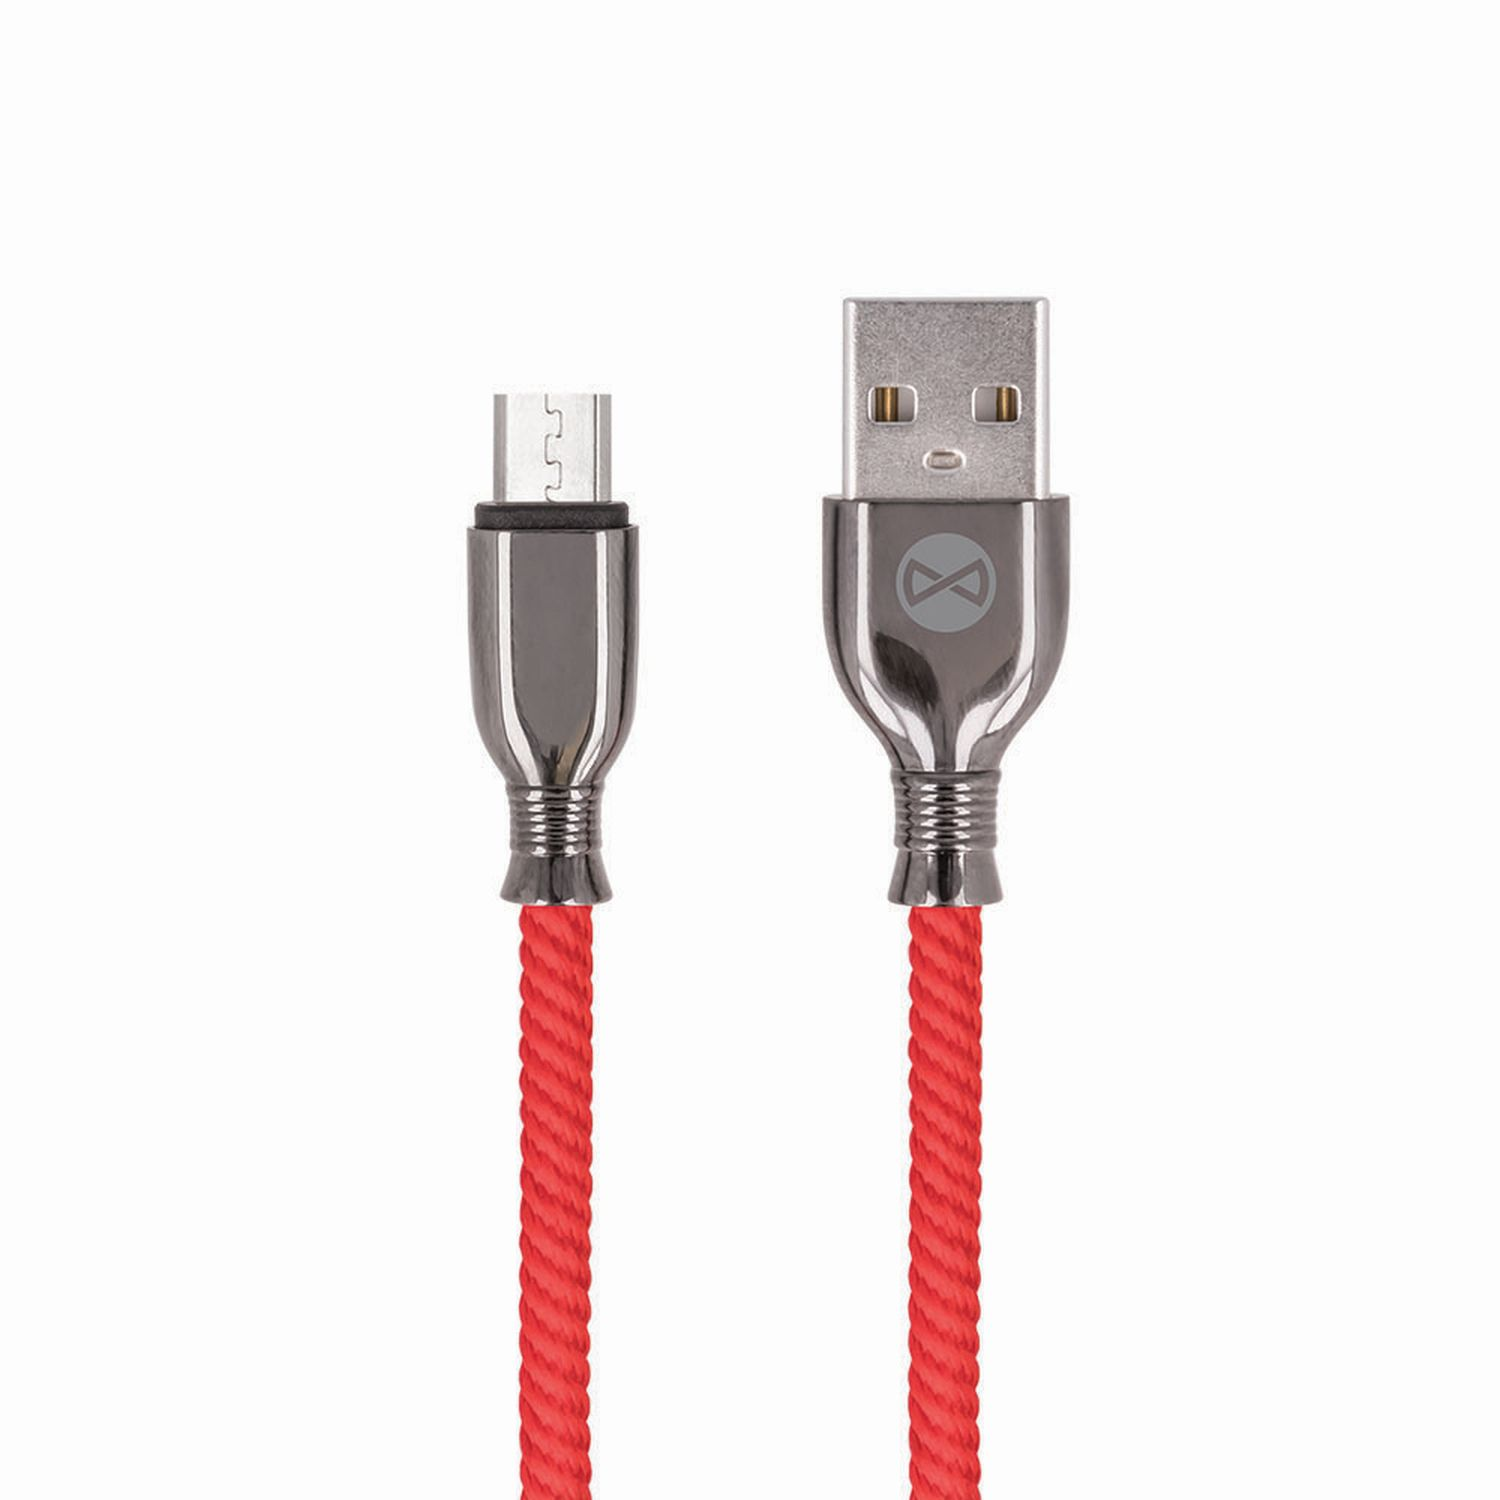 FOREVER Tornado 3A Rot Bruch, Ladekabel, USB Anti Micro